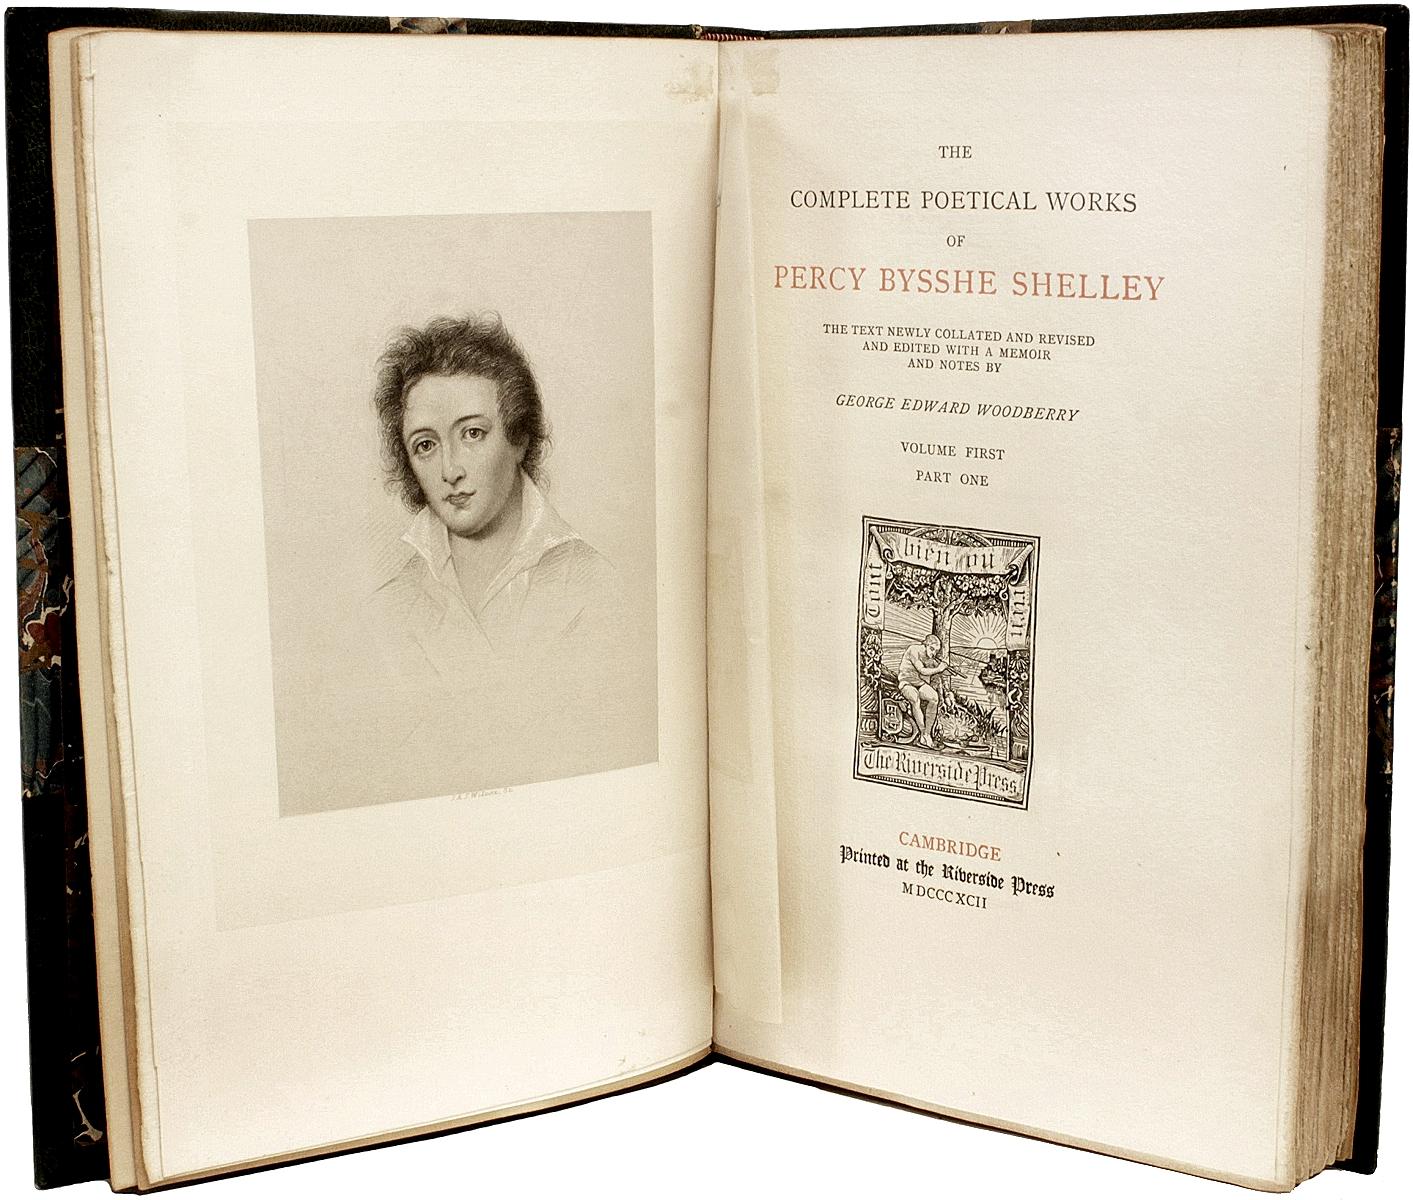 Author: SHELLEY, Percy Bysshe. 

Title: The Complete Poetical Works of Percy Bysshe Shelley.

Publisher: Boston: The Riverside Press, 1892.

Description: 8 vols., 8-11/16